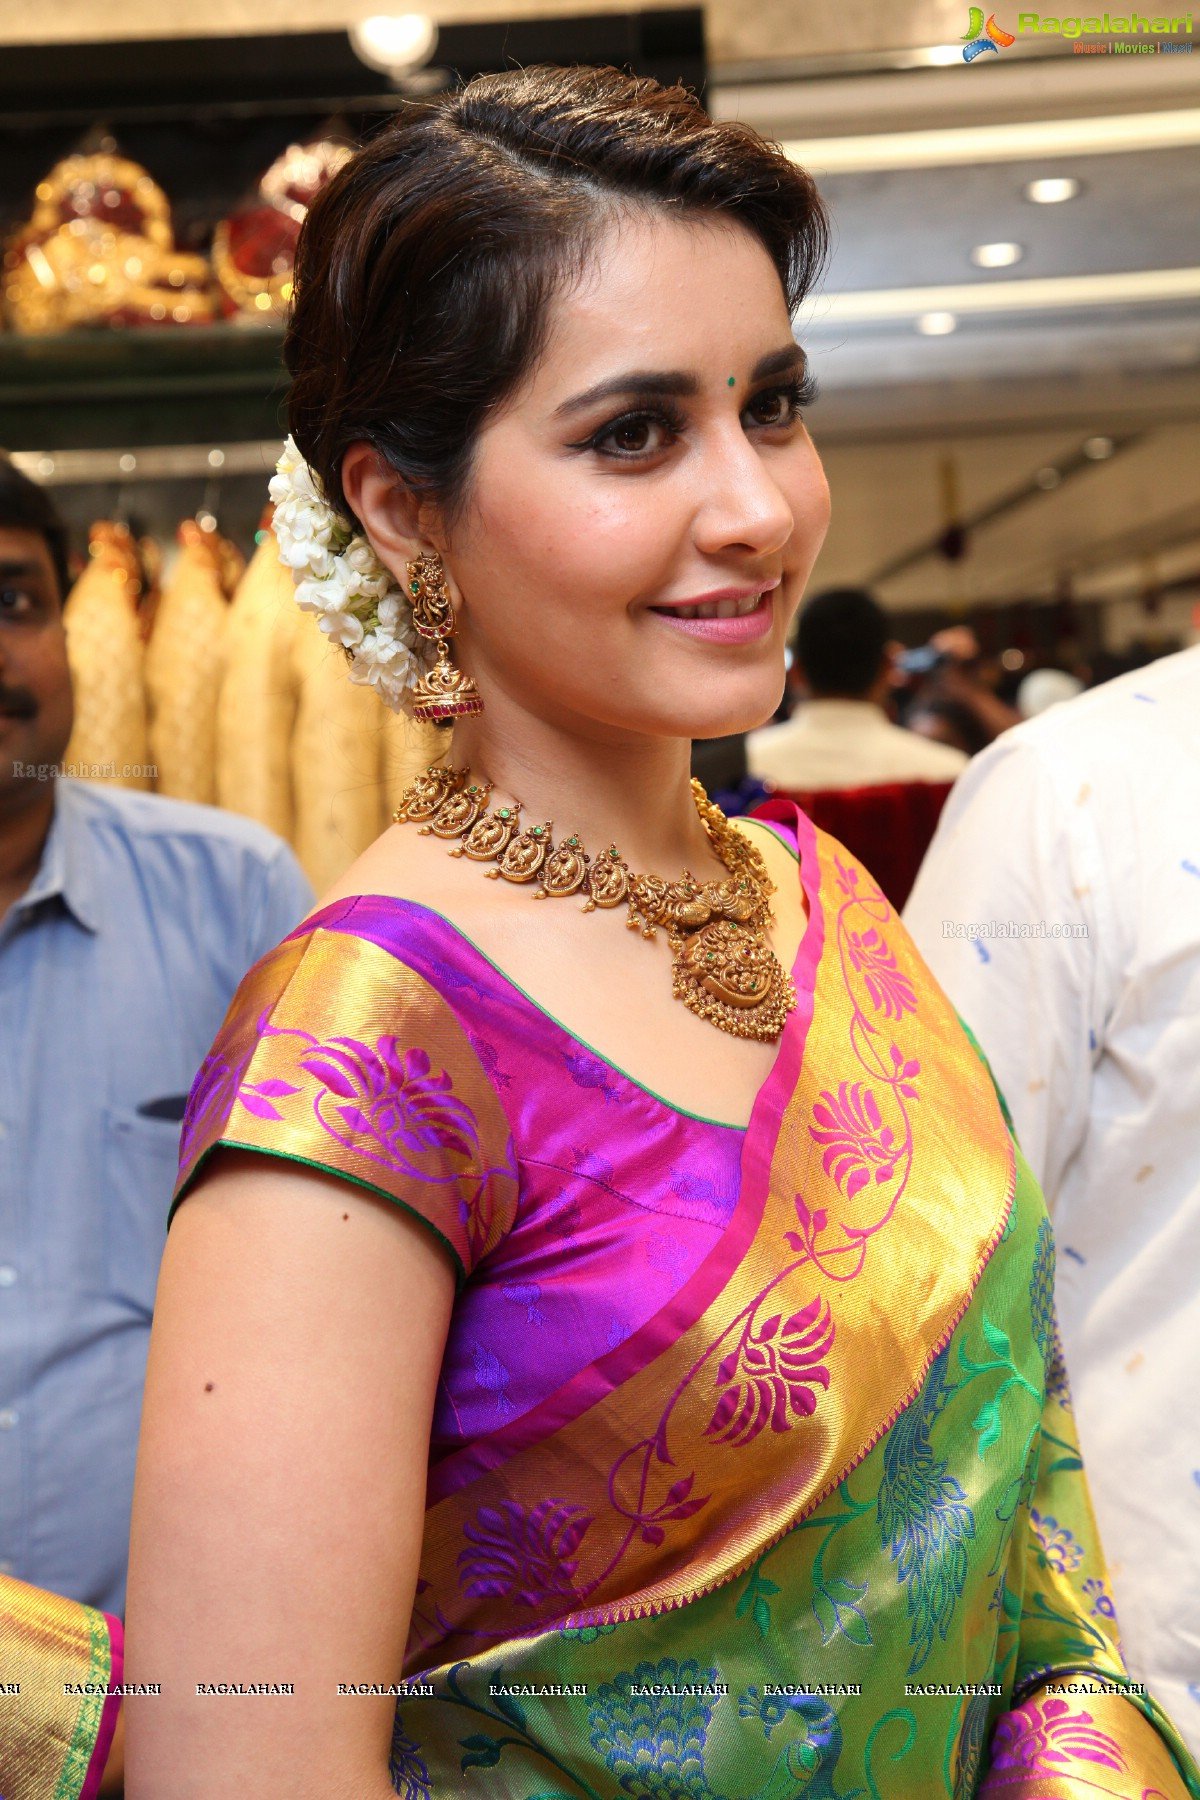 Gorgeous Raashi Khanna in Saree at South Indian Shopping Mall